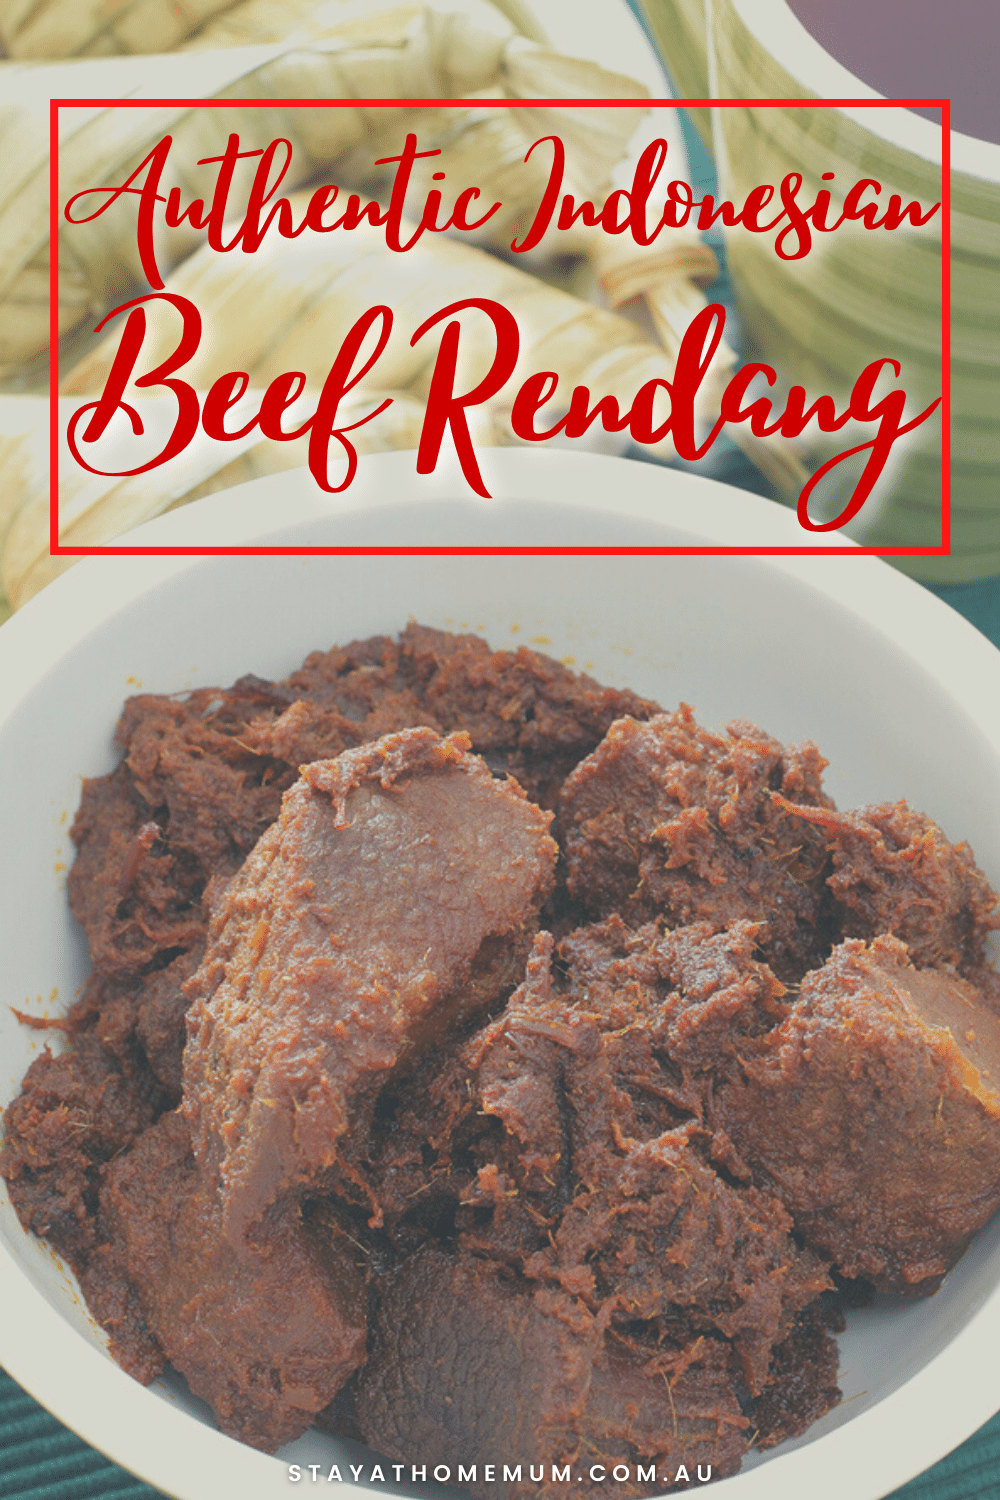 Authentic Indonesian Beef Rendang | Stay at Home Mum.com.au